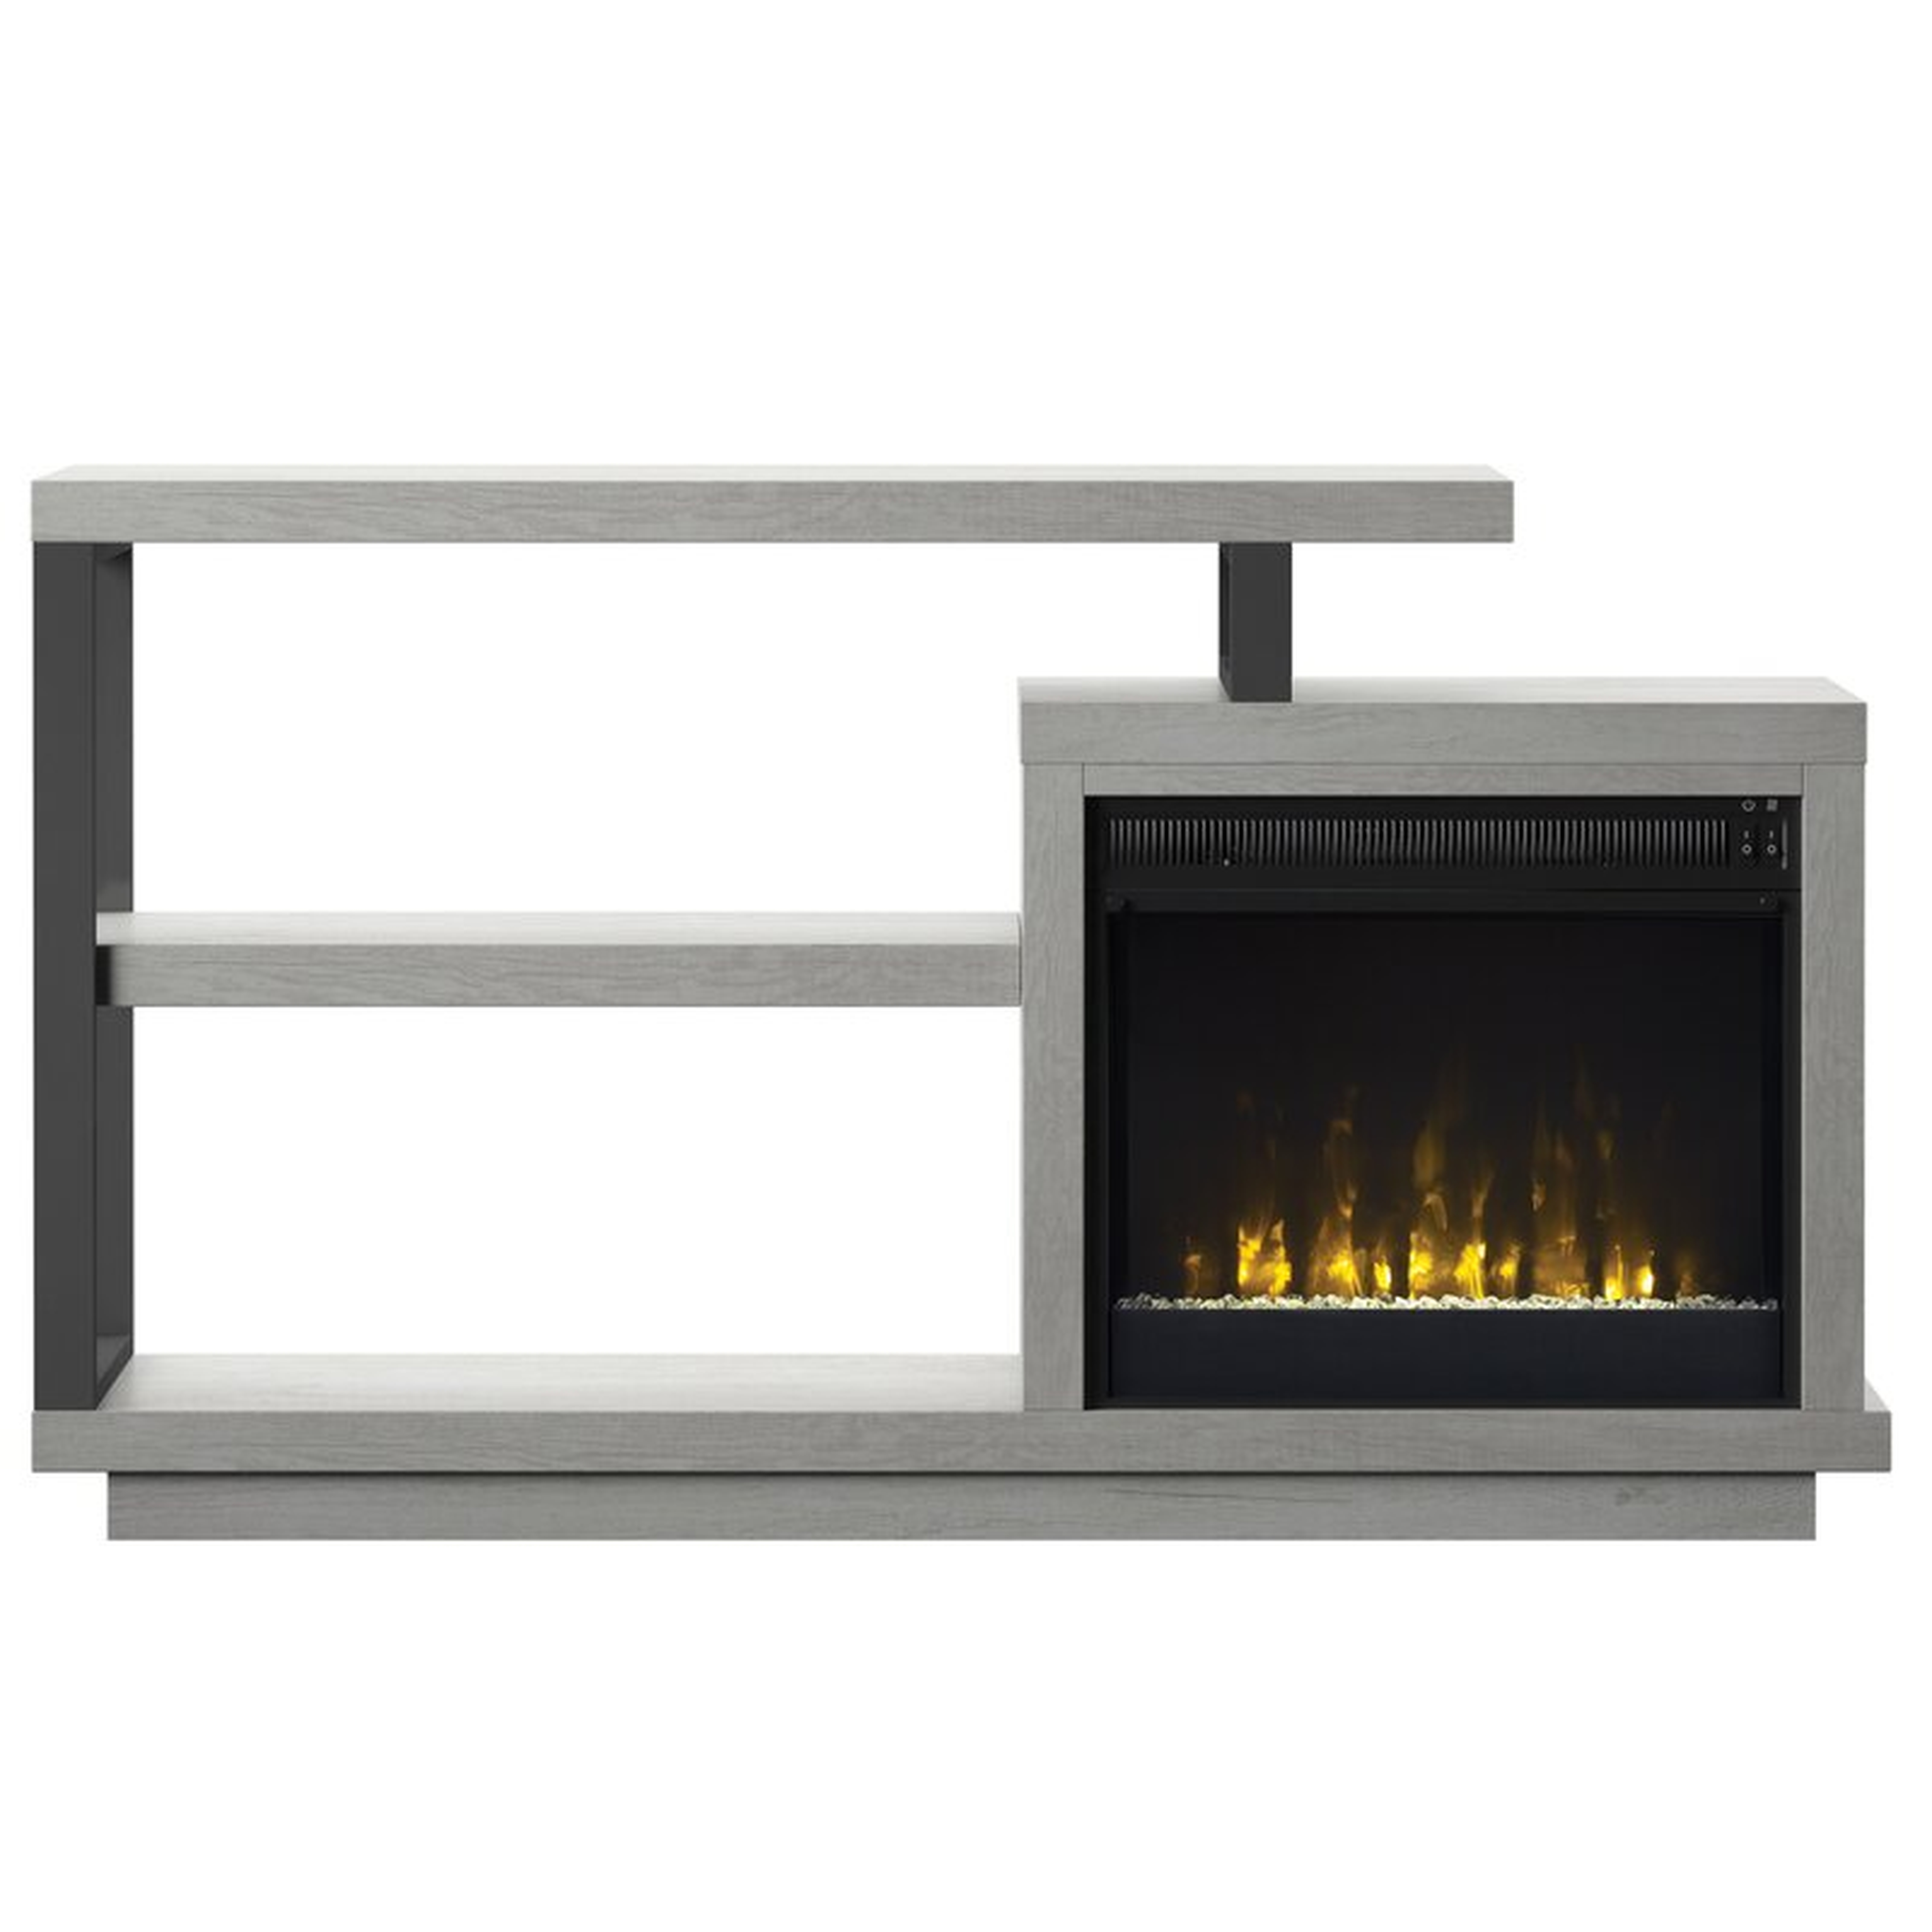 Garrow TV Stand for TVs up to 50" with Electric Fireplace - Wayfair